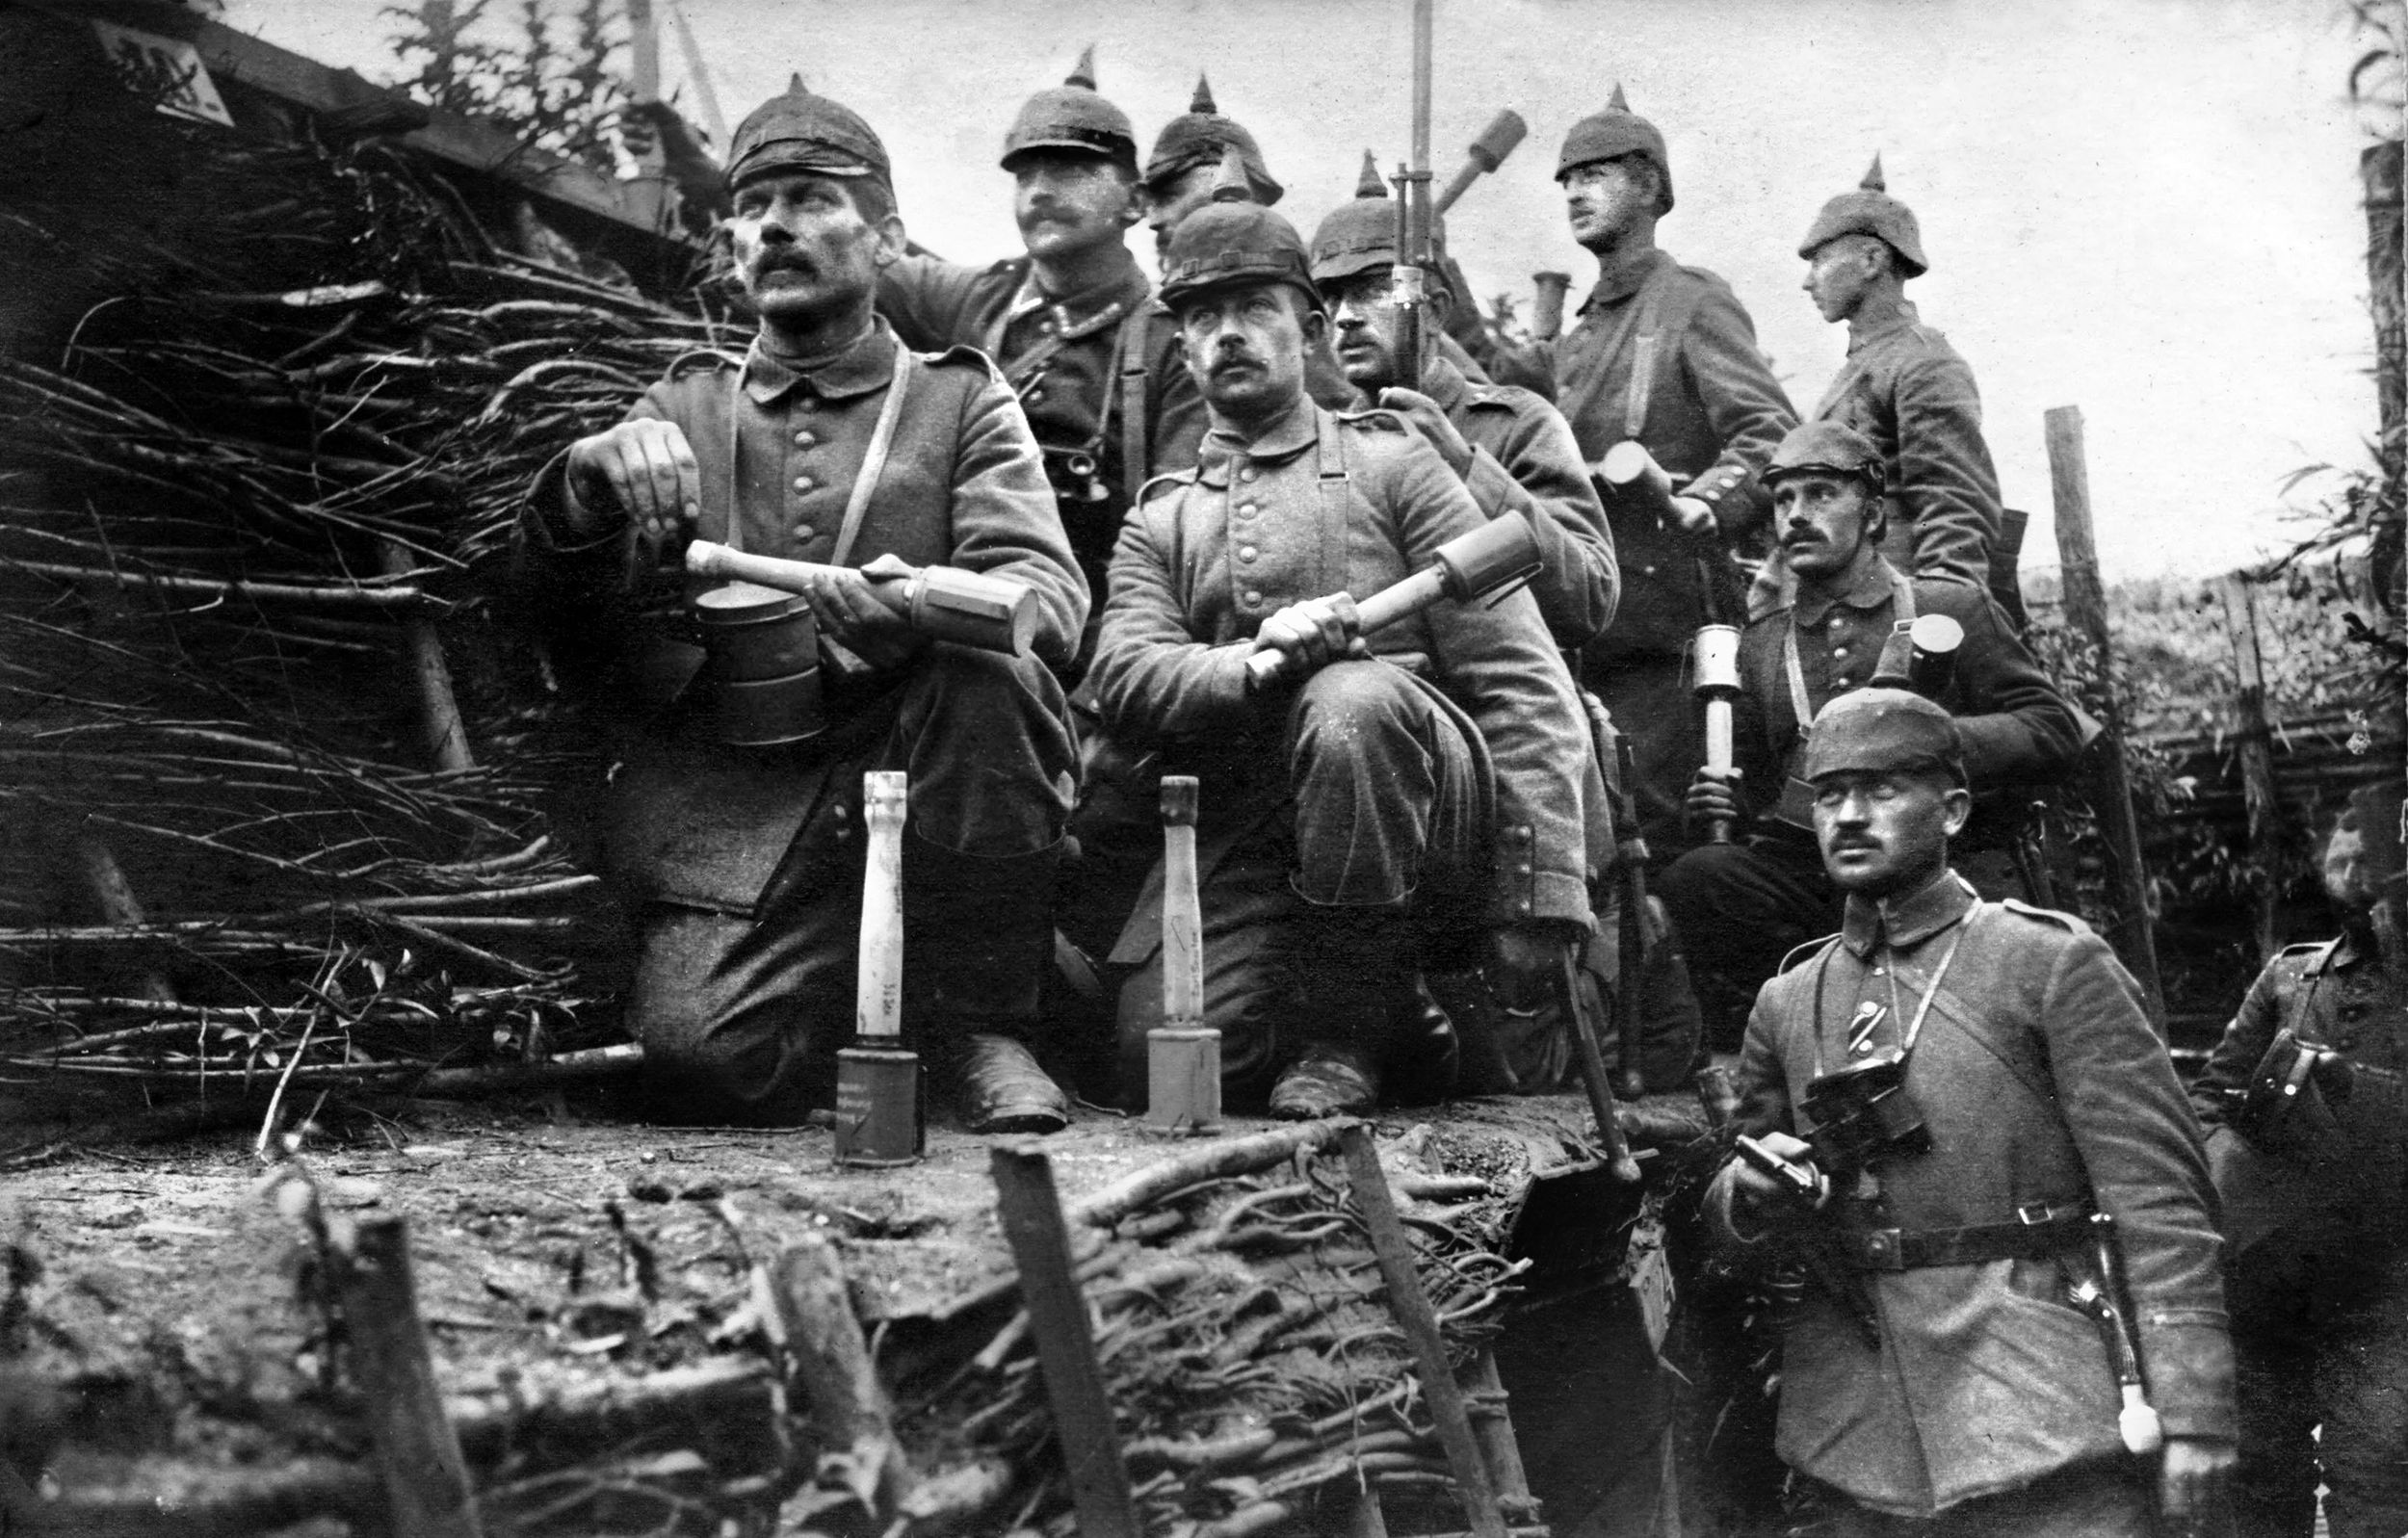 Germany infantry pose for a trench photo brandishing their “potato masher” grenades and “pickelhaube” leather helmets. The German “stick” style grenade was capable of being thrown somewhat further than the British “Mills bomb.” The pickelhaube, like British headgear, offered little protection and was replaced by the “Stahlhelm” steel helmet beginning in 1916. The French replaced their cloth “kepis” with their distinctive “Adrian” steel helmets beginning in July 1915. 